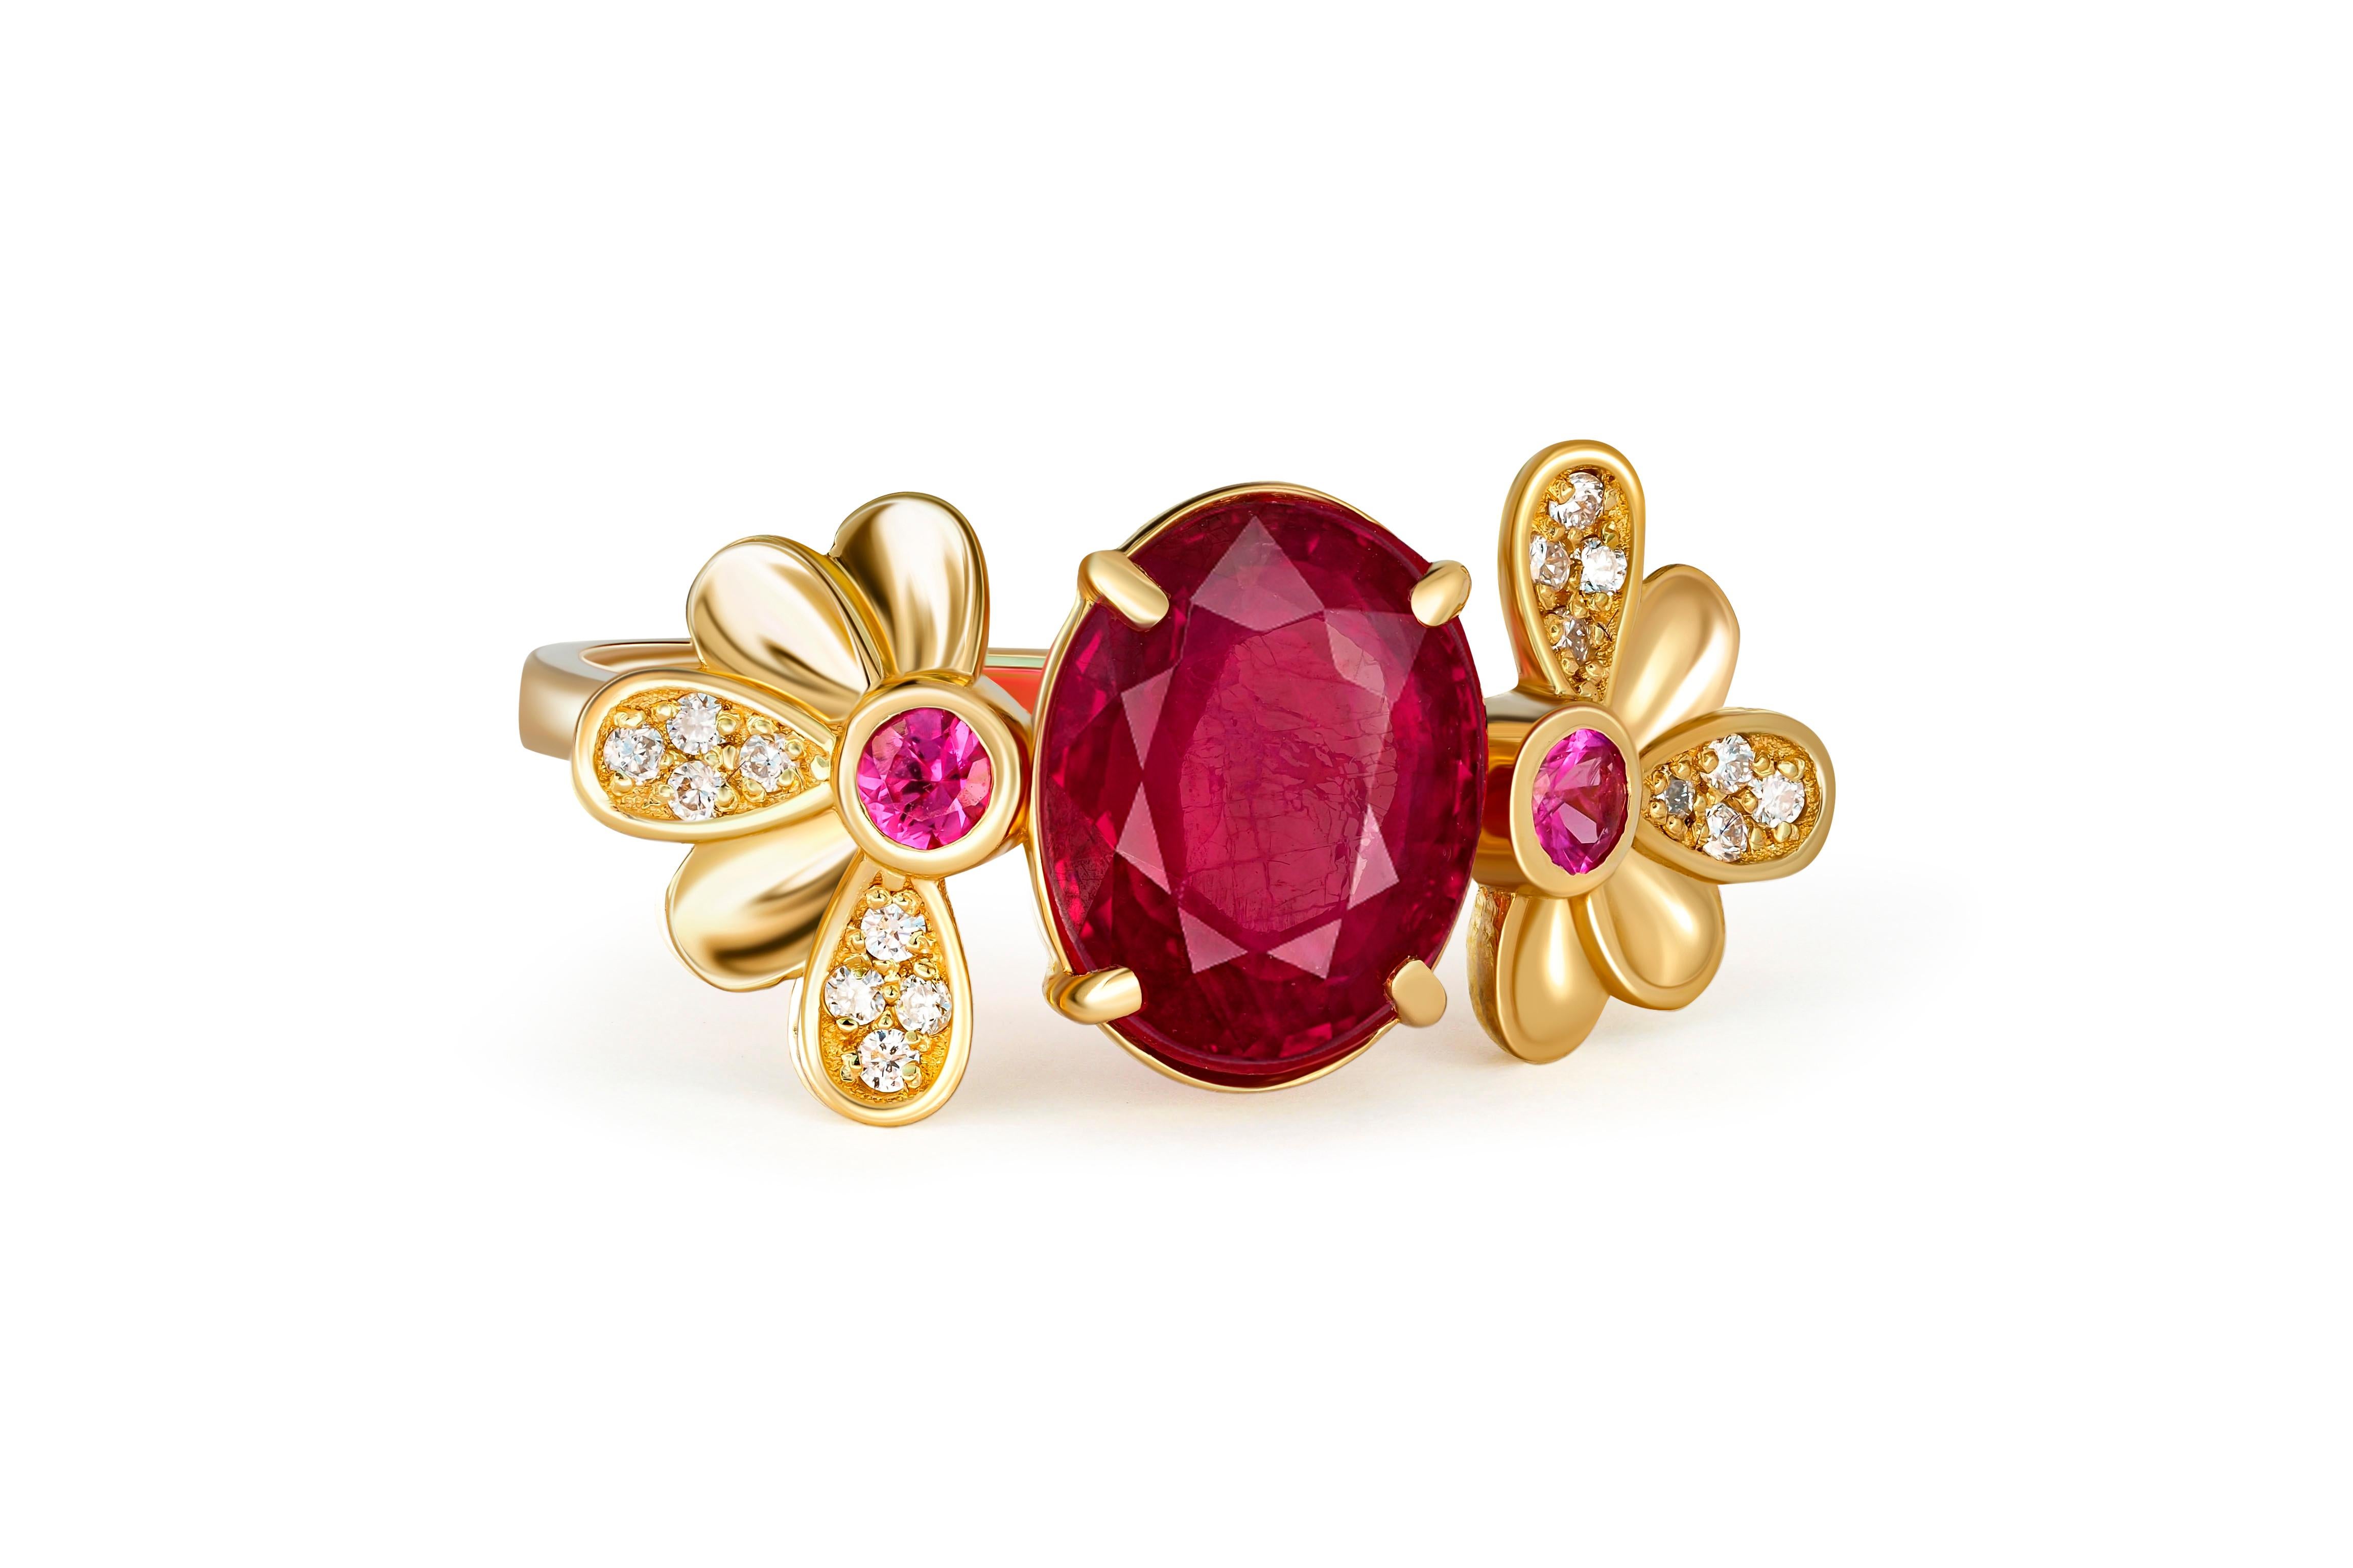 Statement ruby ring. 
Ruby, diamonds 14k gold ring. Cocktail ruby ring. Oval ruby ring. Genuine ruby ring. July birthstone ring. Floral ring.

Metal: 14k gold
Weight: 2.95 g. depends from size.

Central stone: Ruby
Color - red
Oval cut, 2.00 ct. in